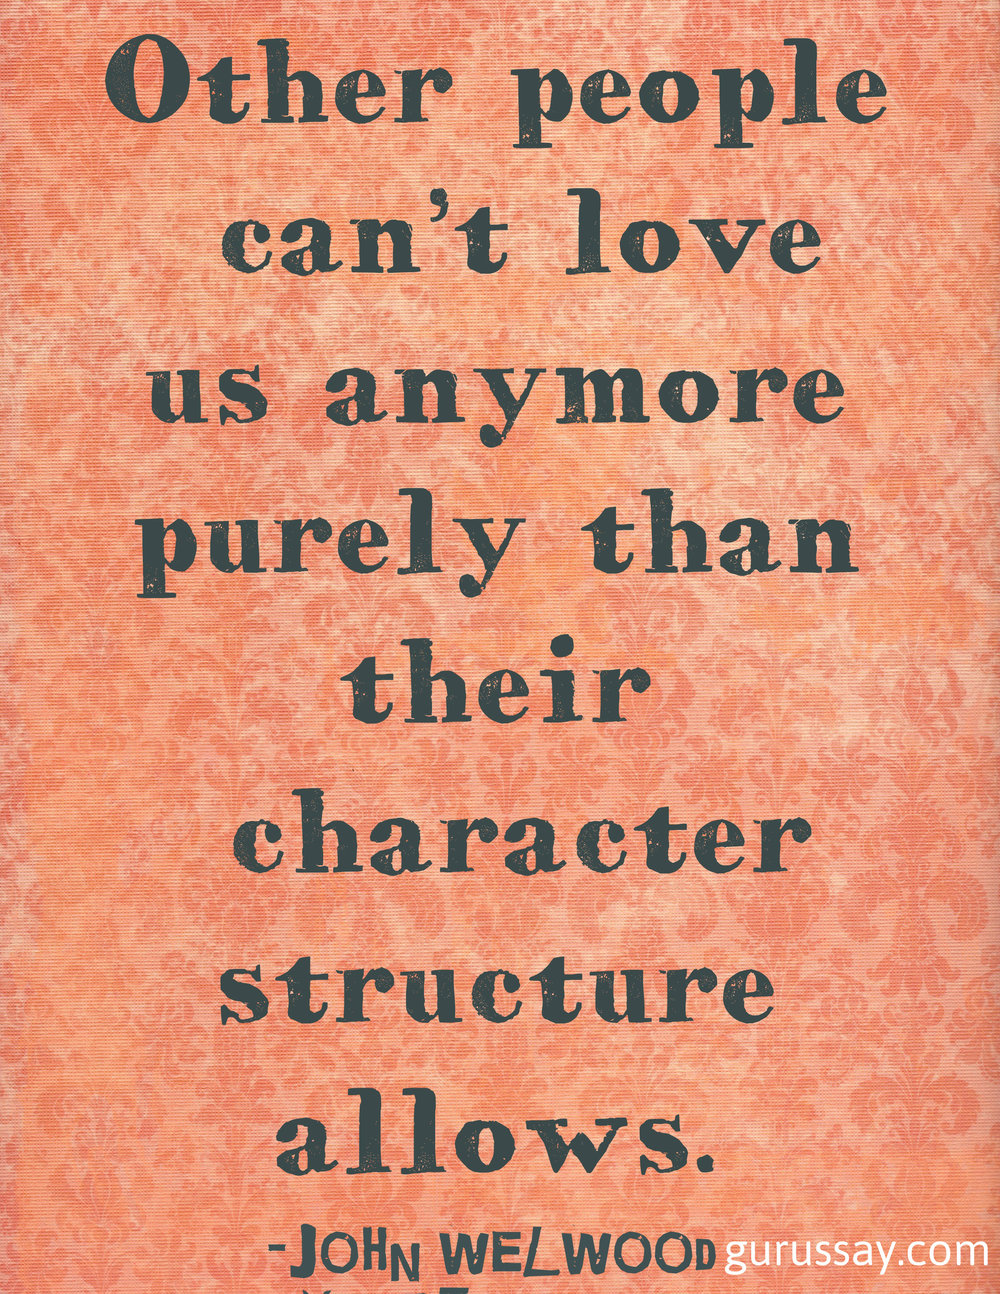 love quotes can t love character gurussay pure